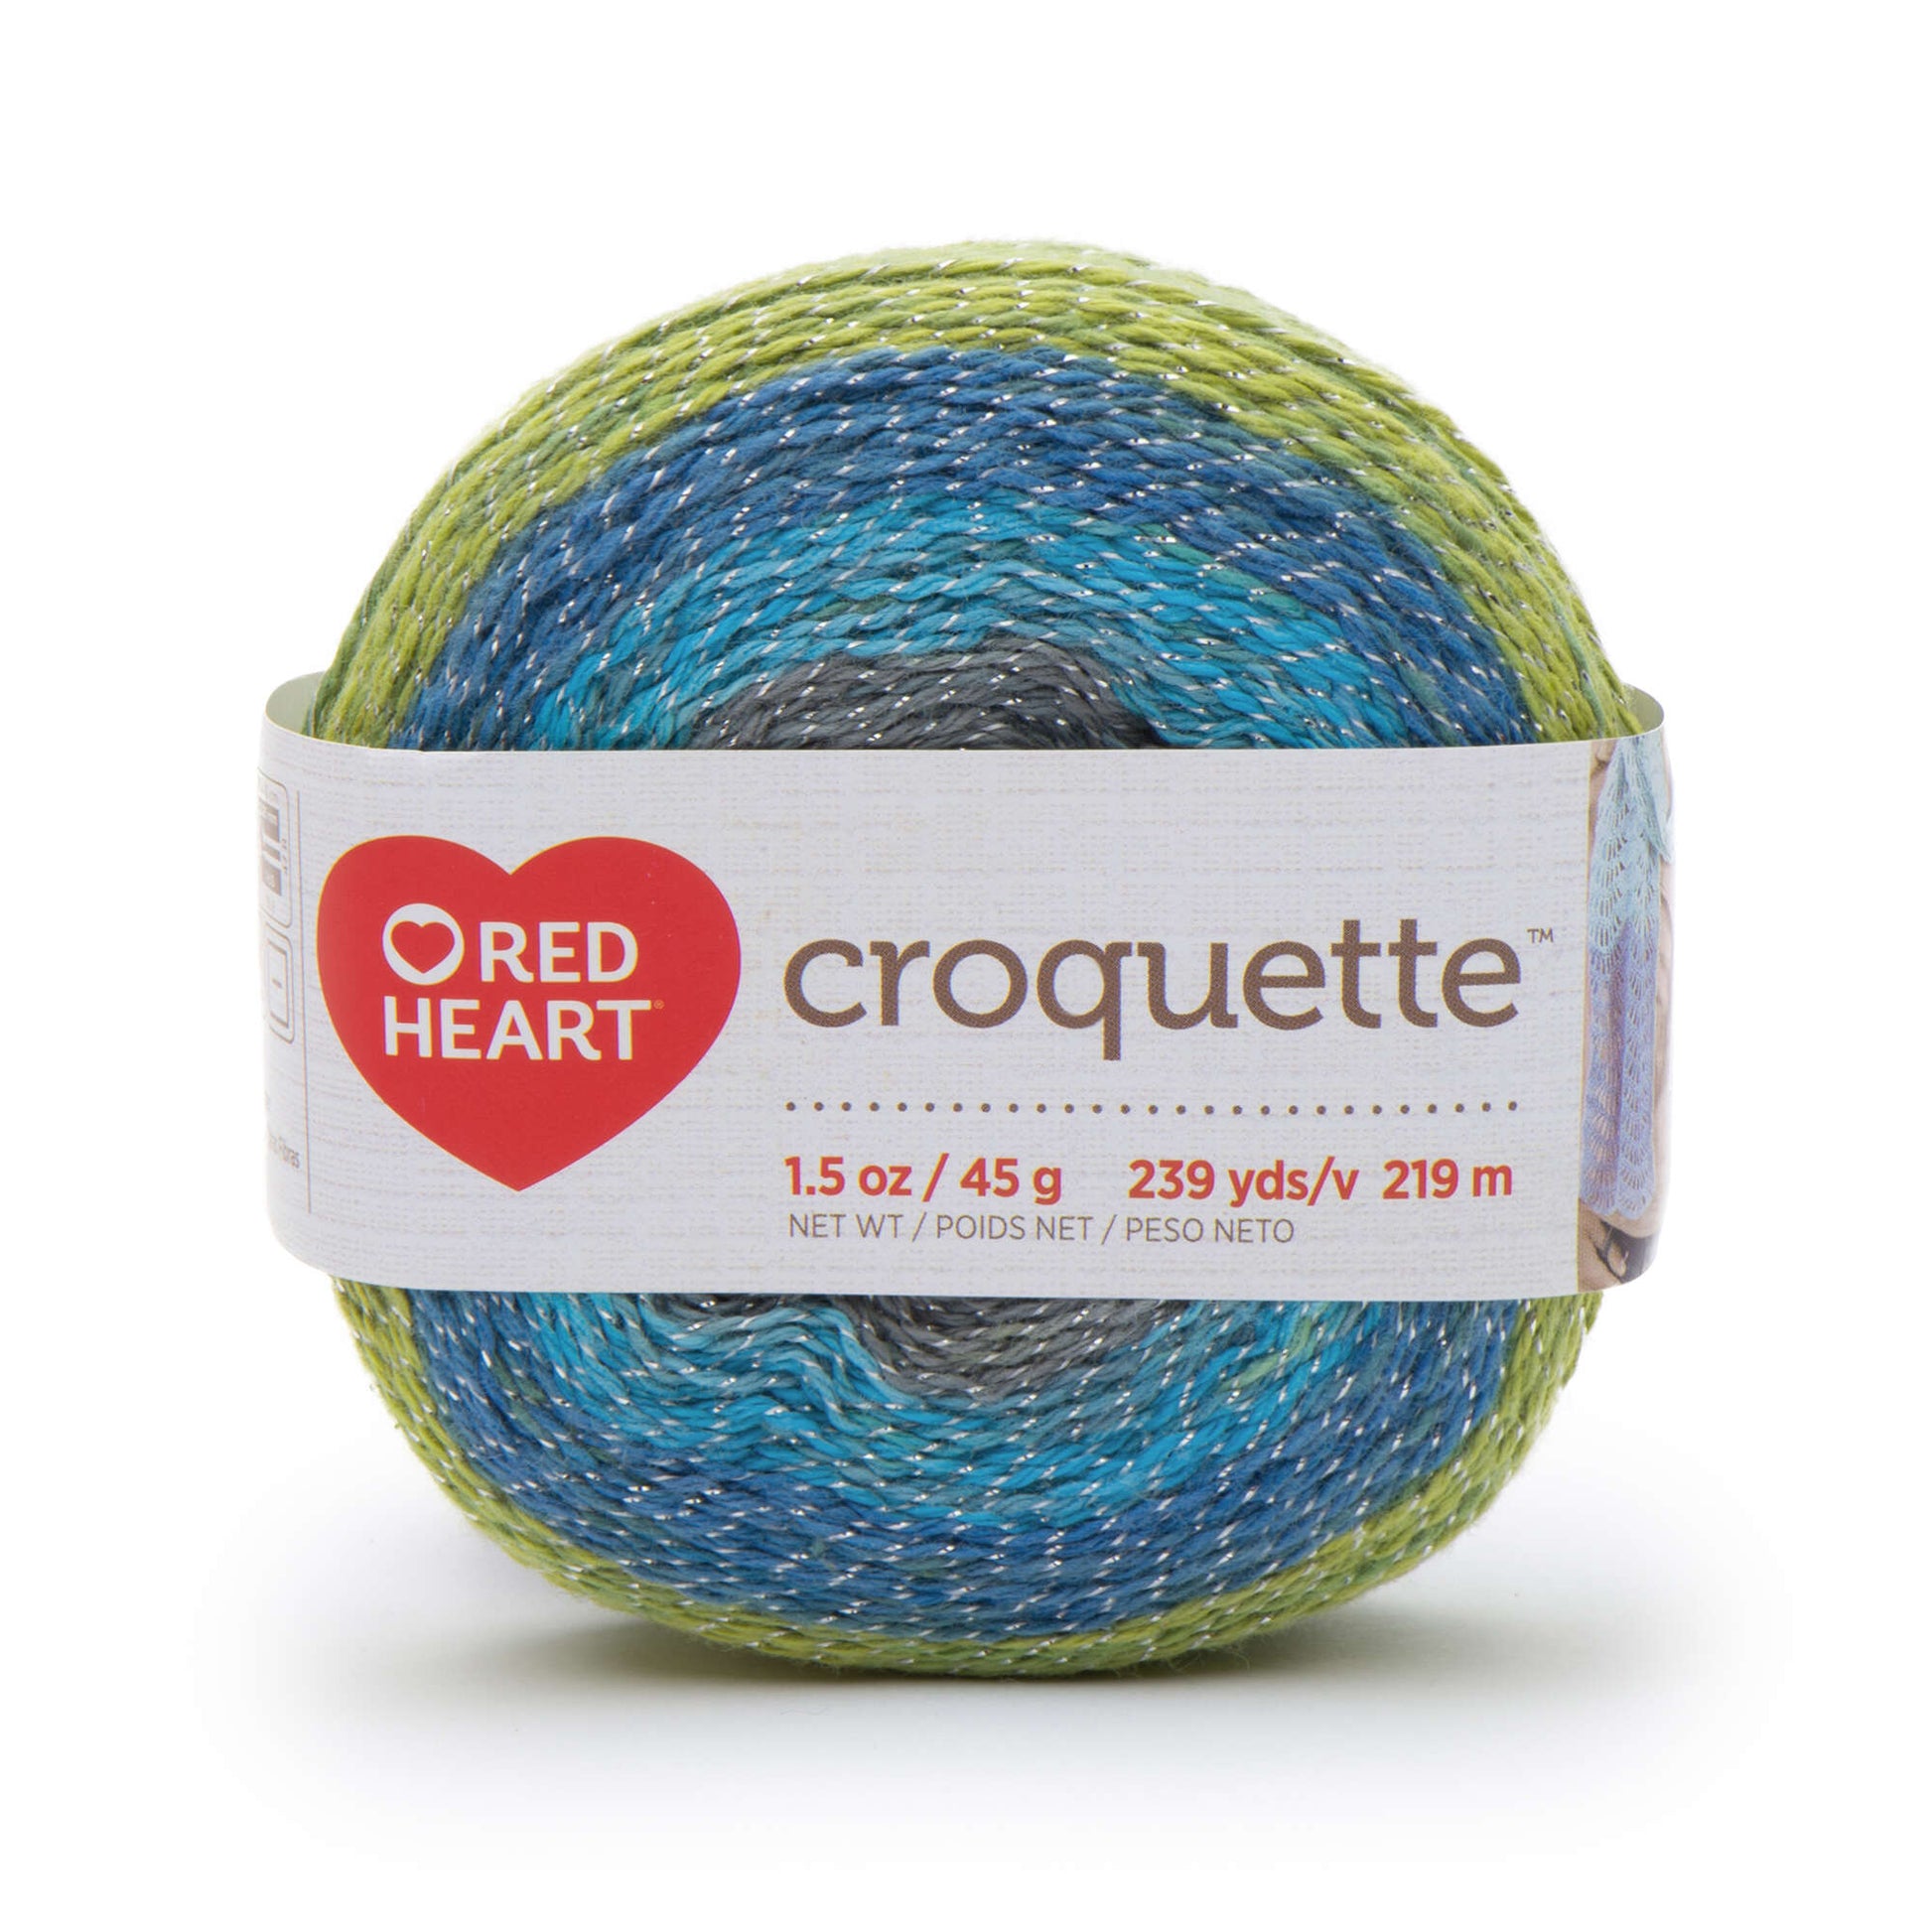 Red Heart Croquette Yarn - Clearance shades River Rocks